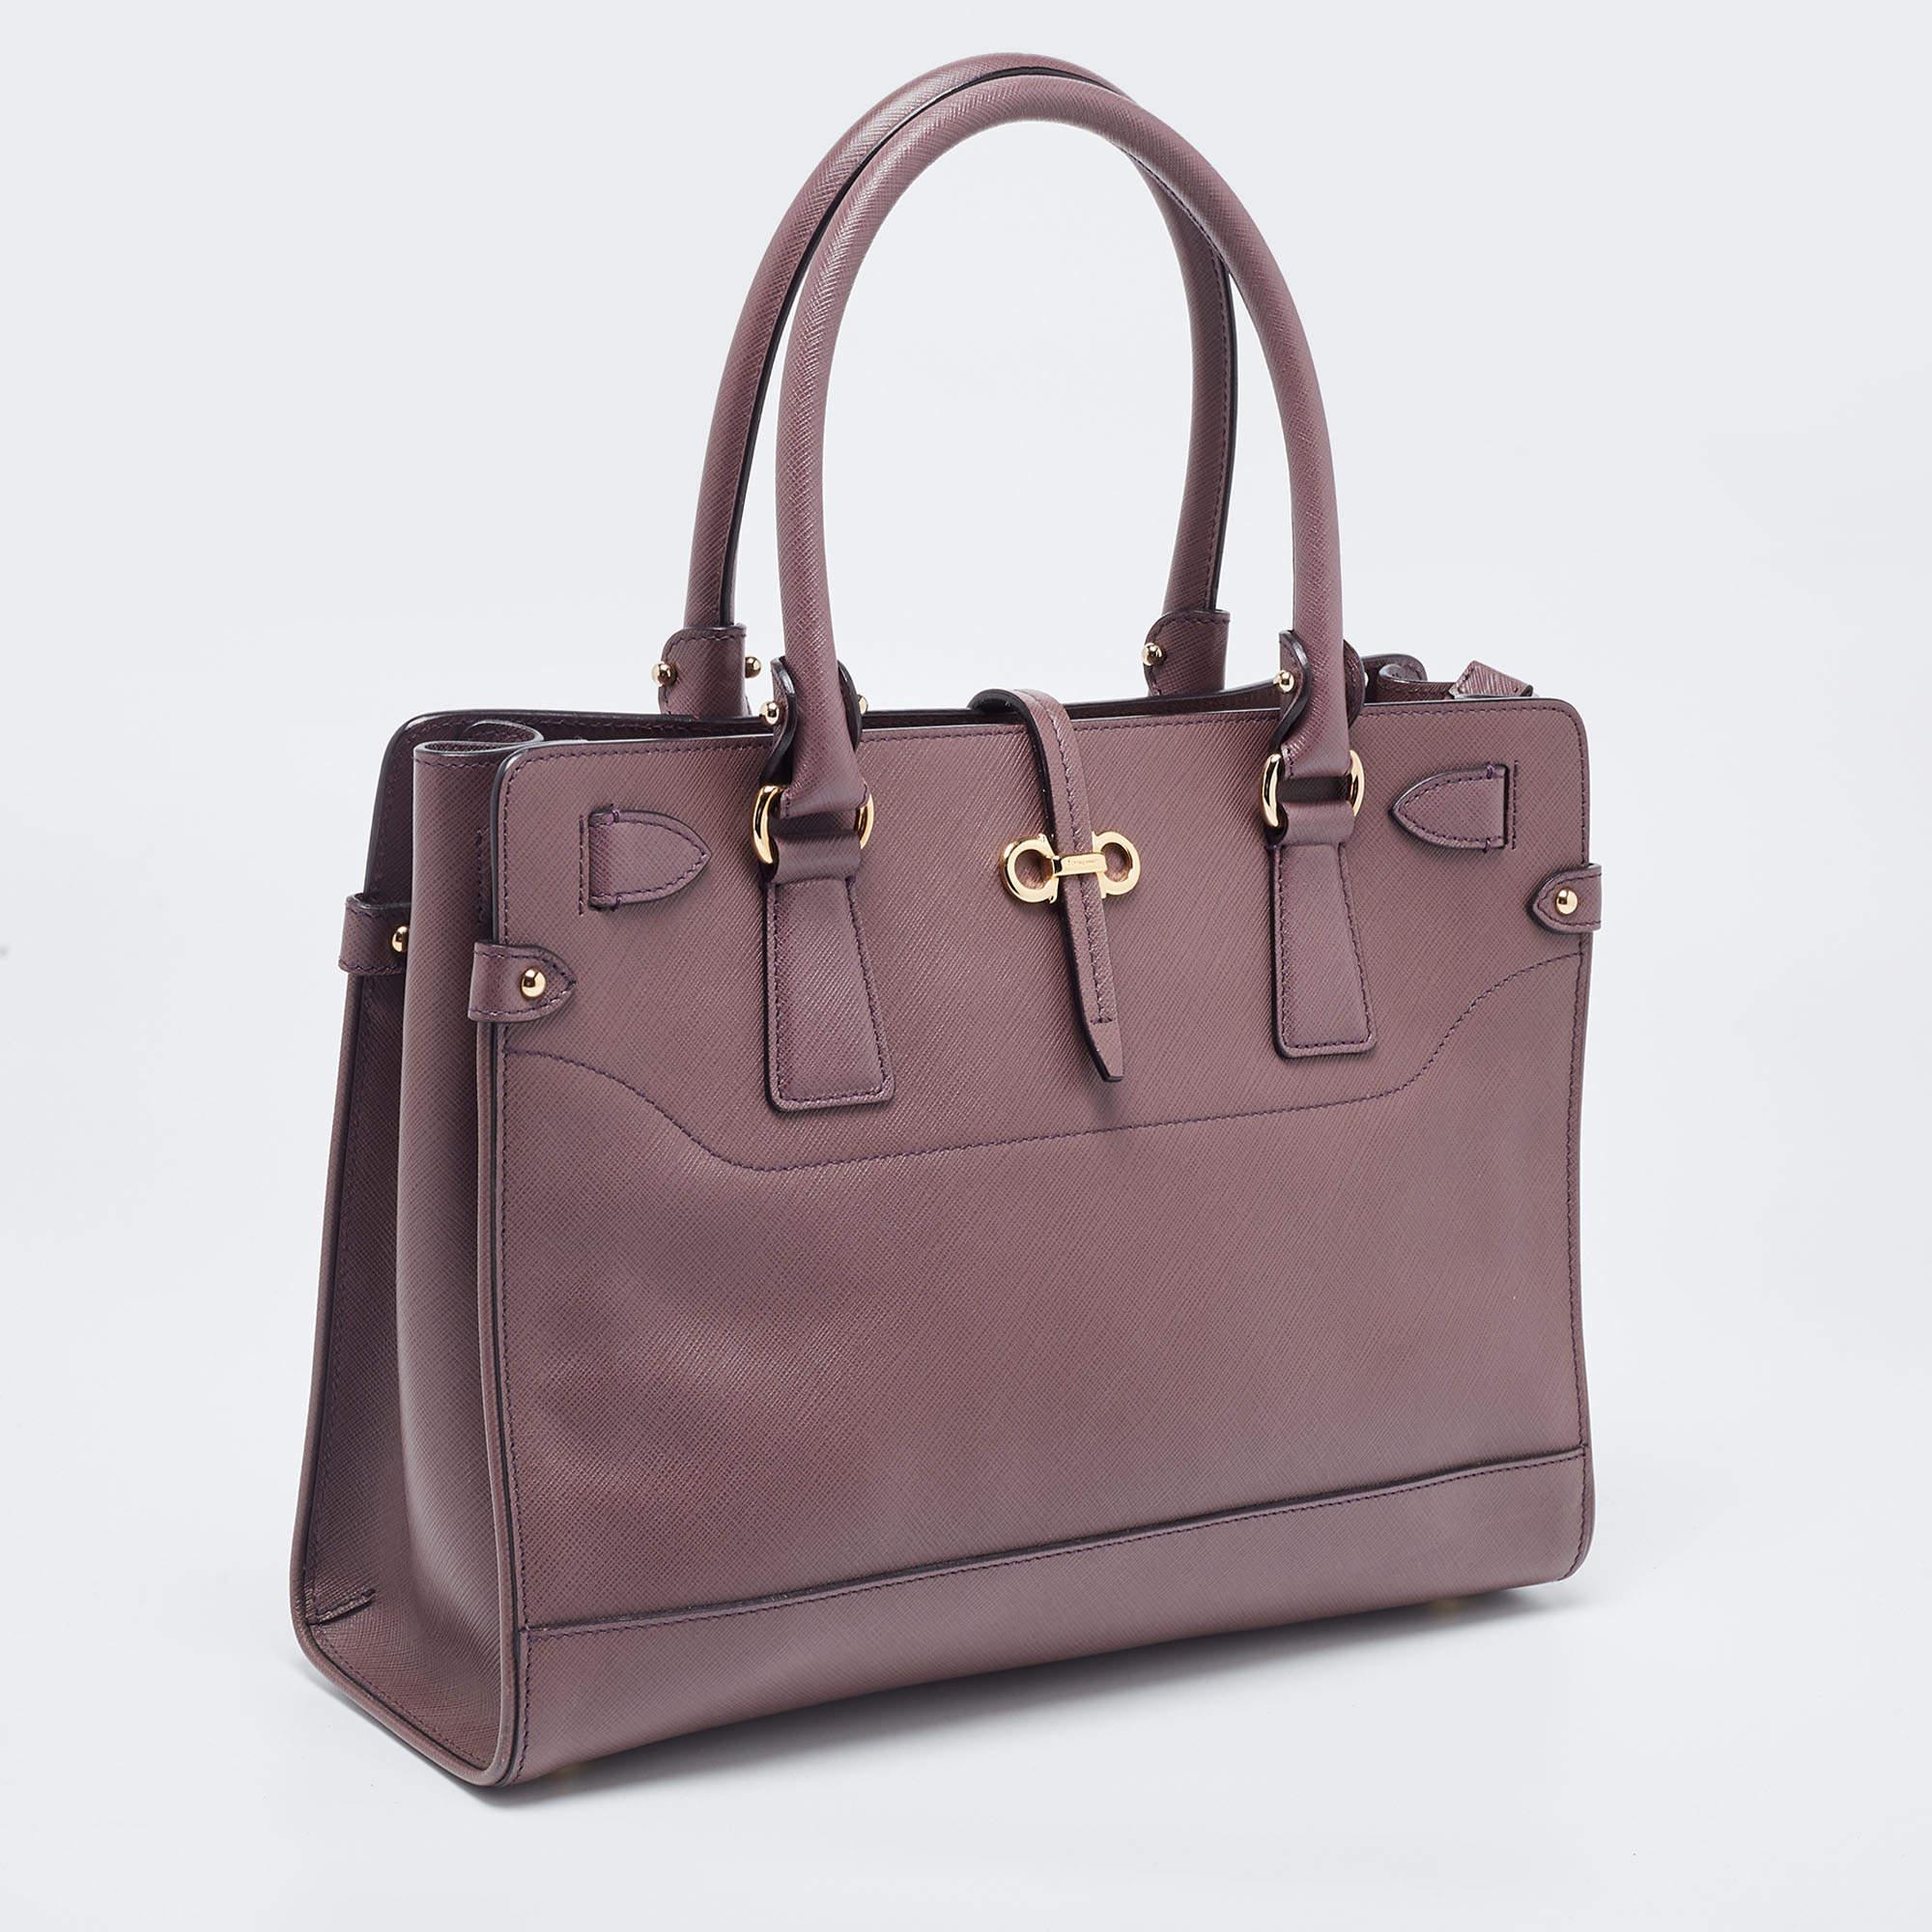 Crafted from leather, this plum Salvatore Ferragamo tote has a little lock-in flap and a spacious fabric interior. The bag is equipped with two handles and protective metal feet. Swing this beauty on your busy days as it is well-made and handy.

